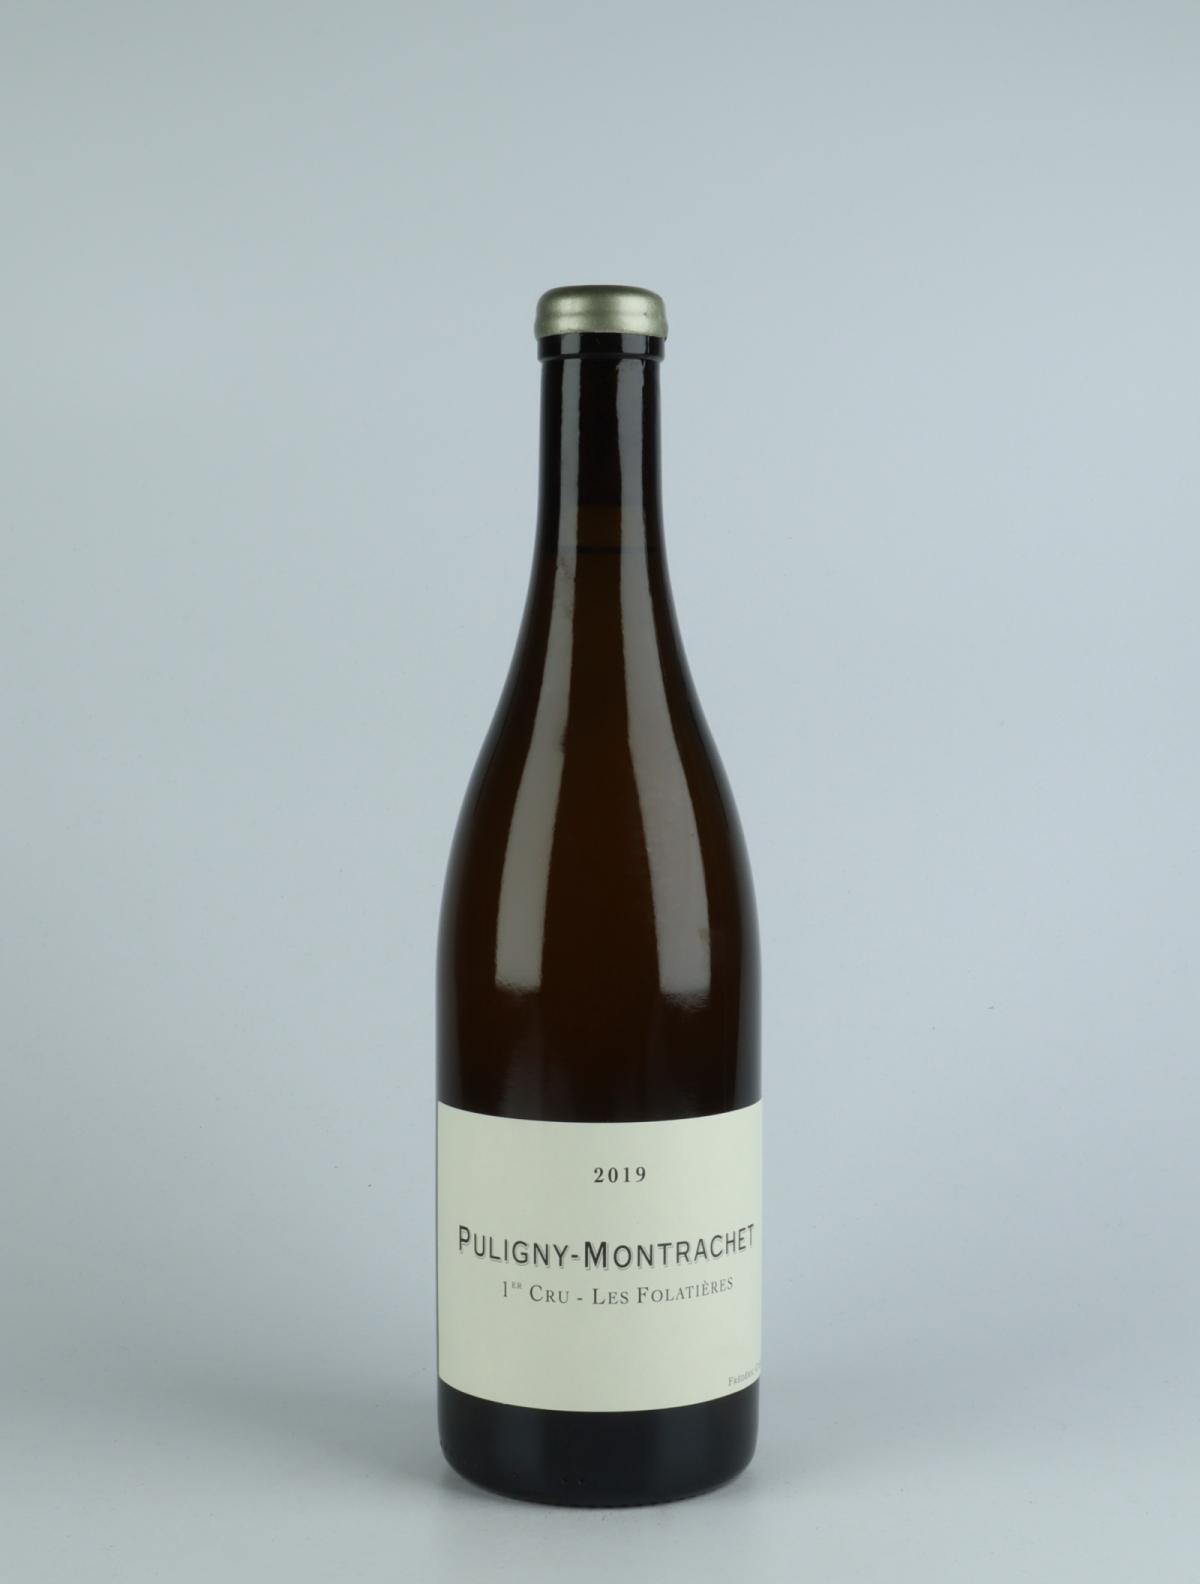 A bottle 2019 Puligny Montrachet 1. Cru - Folatières White wine from Frédéric Cossard, Burgundy in France